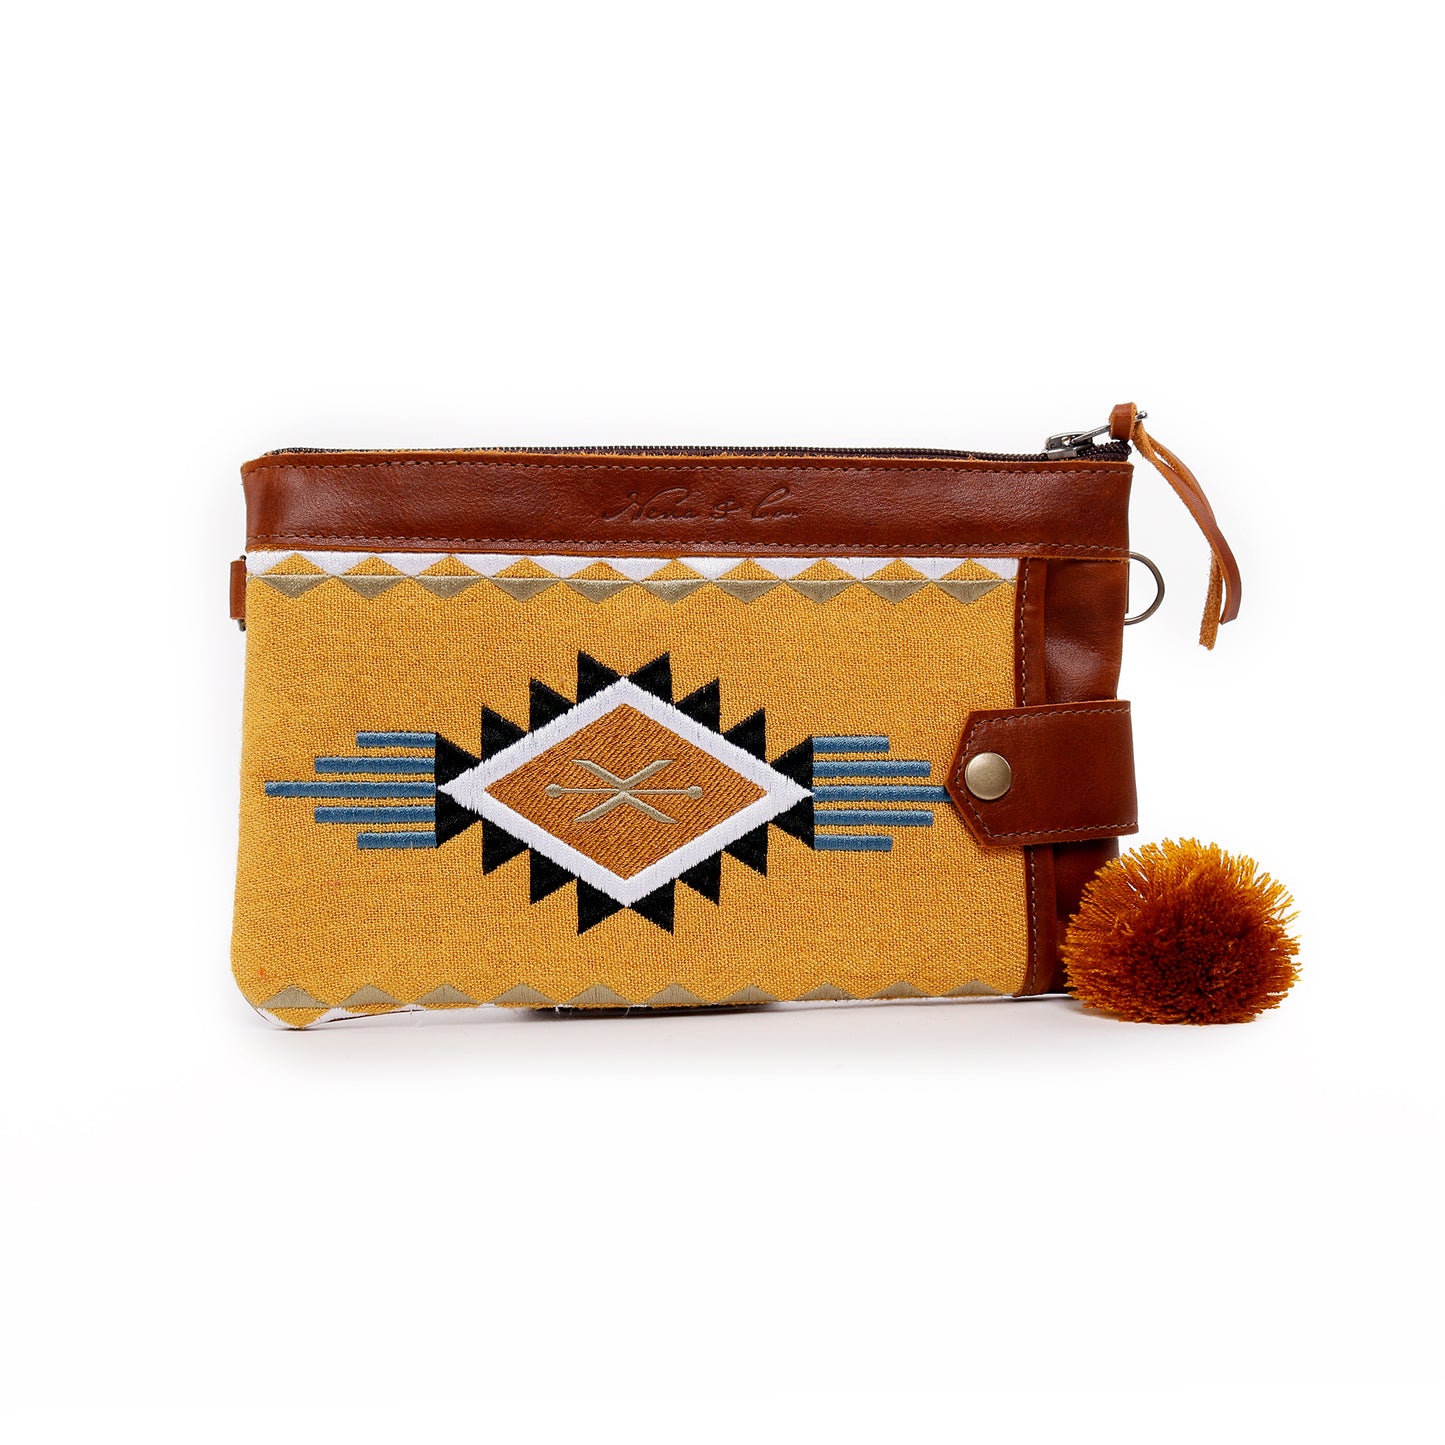 EVERYTHING CLUTCH - 10 YEAR ANNIVERSARY - MACHINE EMBROIDERED ON WOVEN FABRIC IN MUSTARD - CAFE